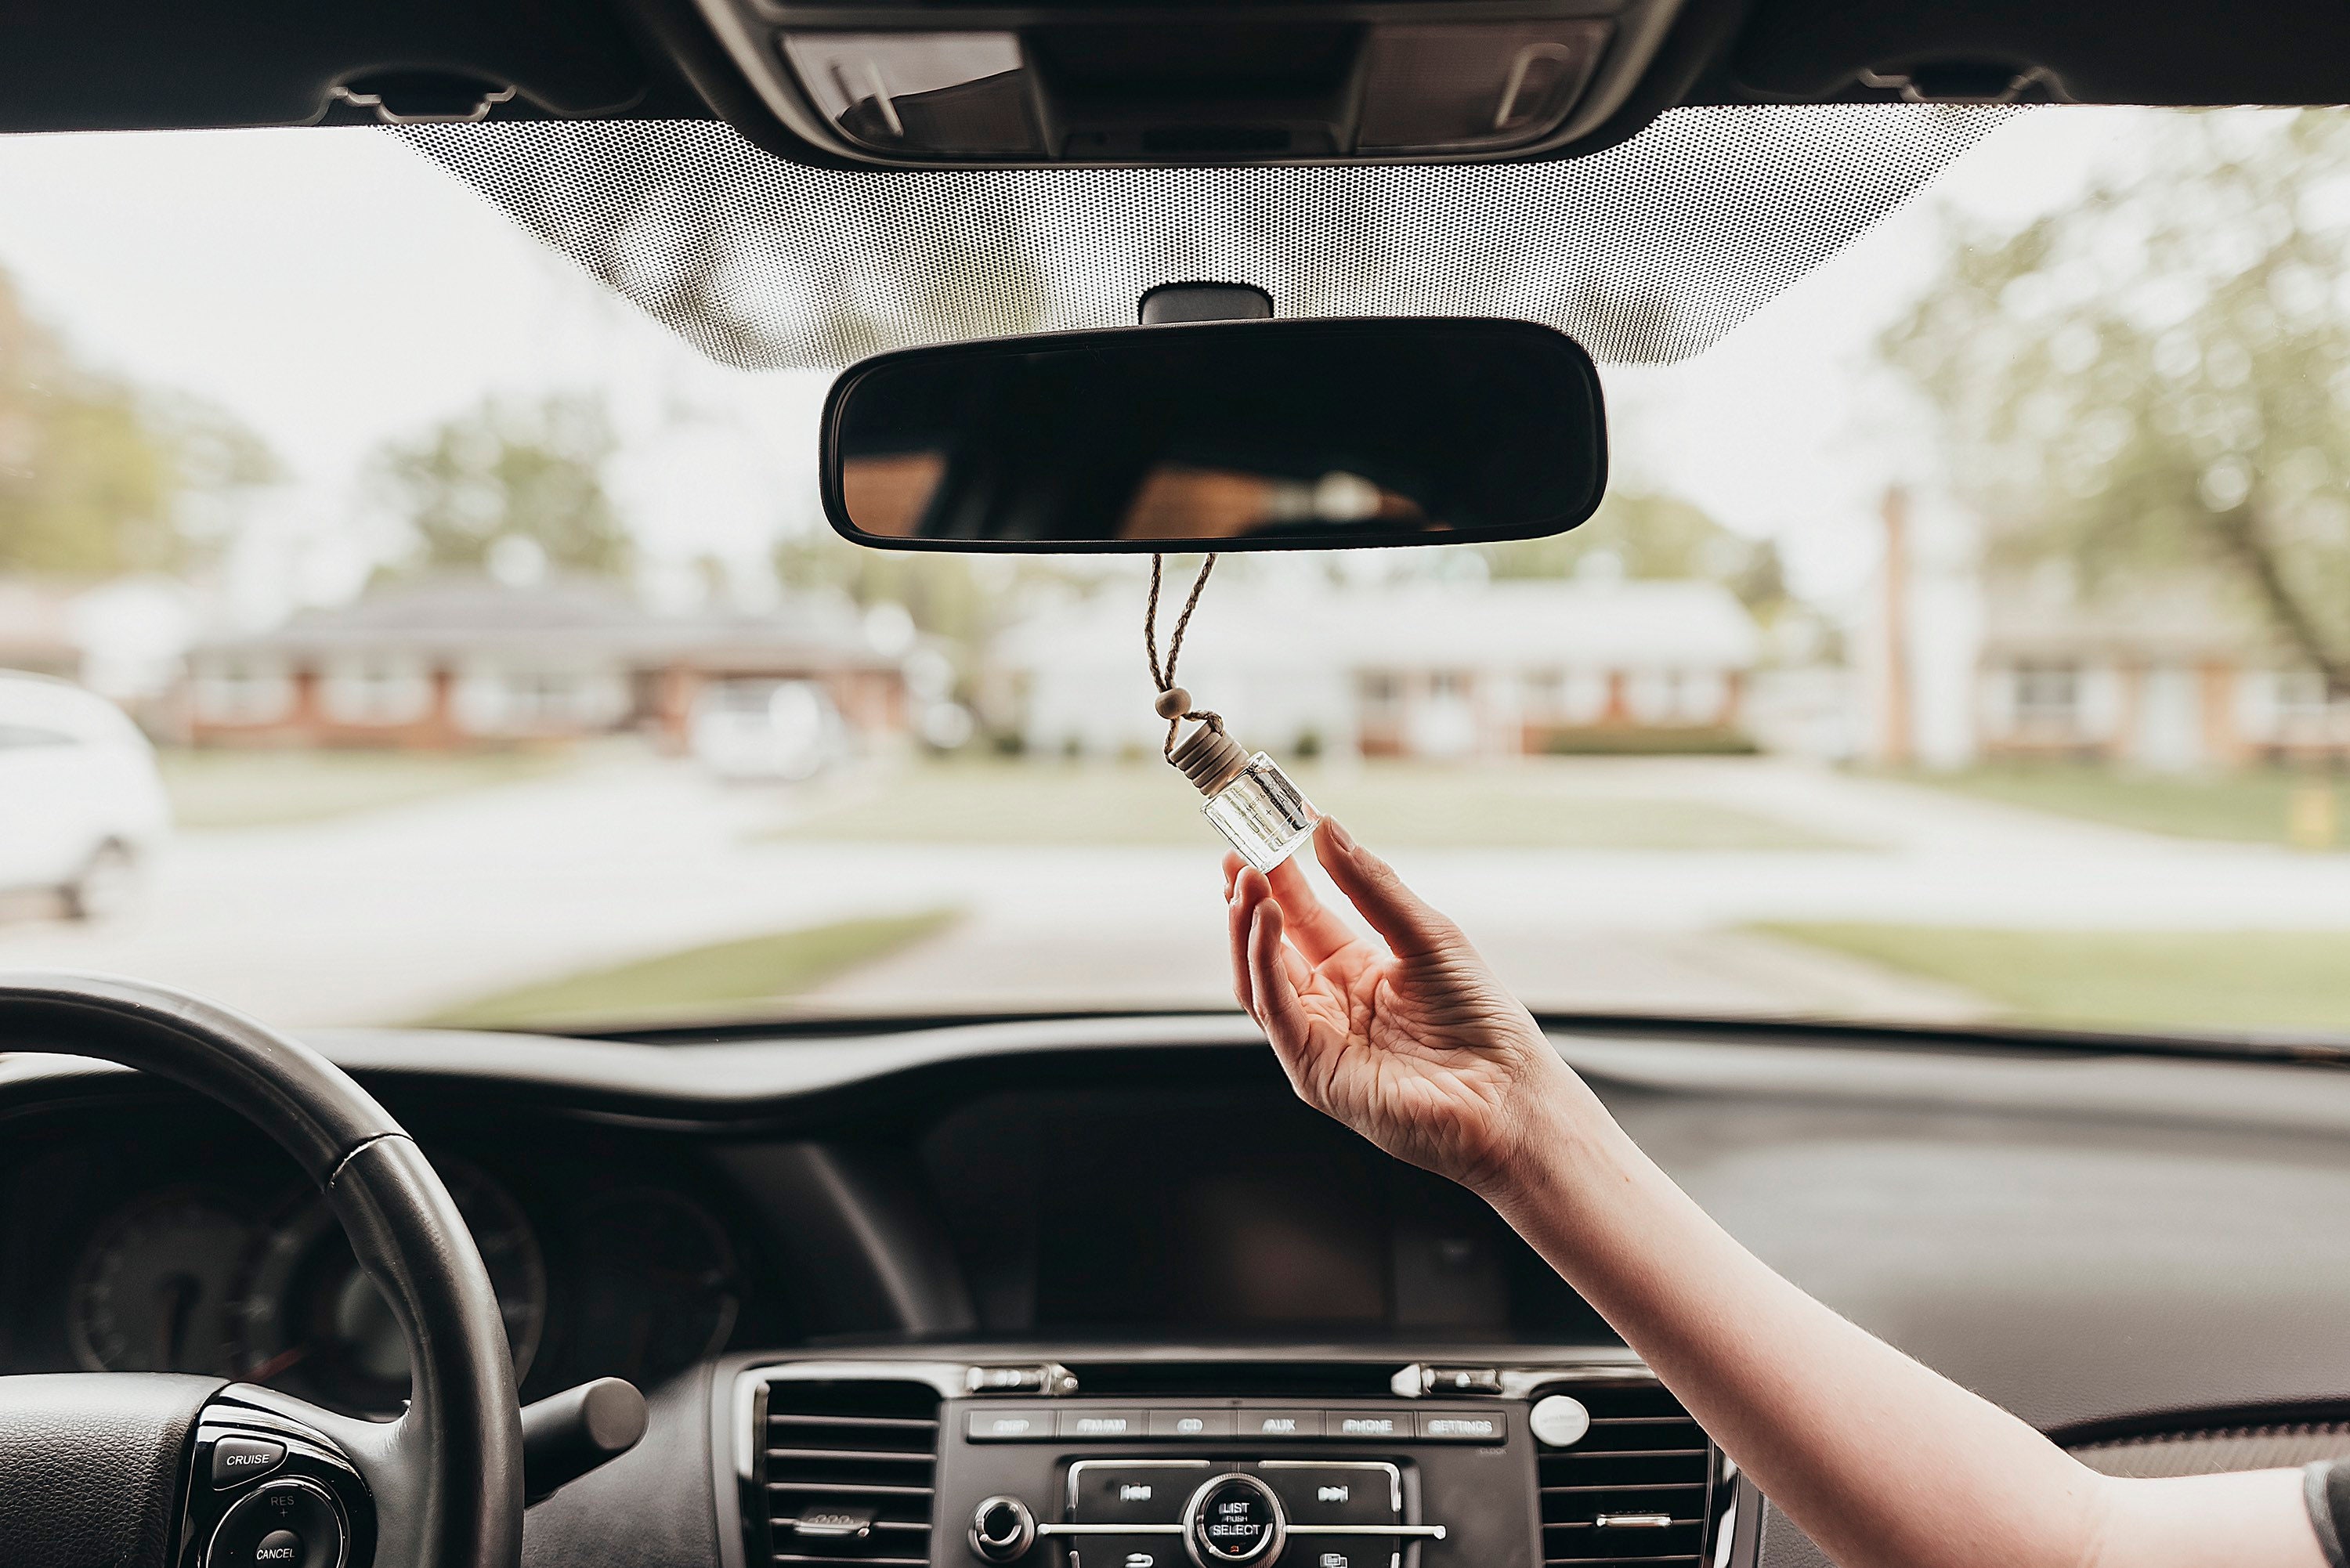 Hanging Car Air Freshener Diffusers – Scent Szn